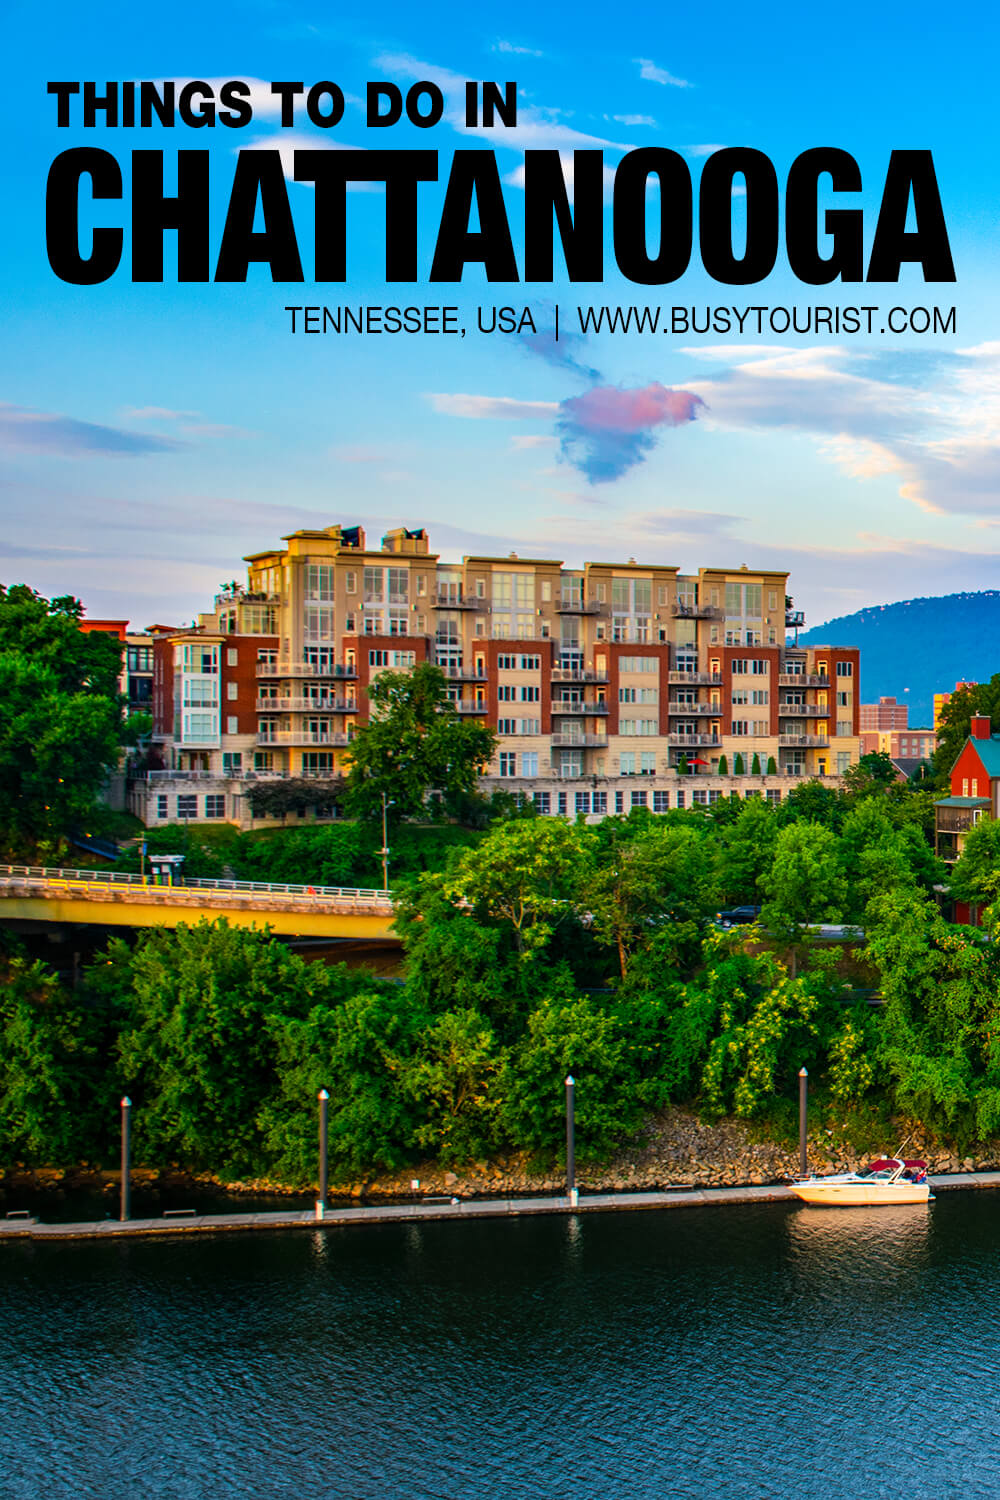 places to visit between chattanooga and atlanta